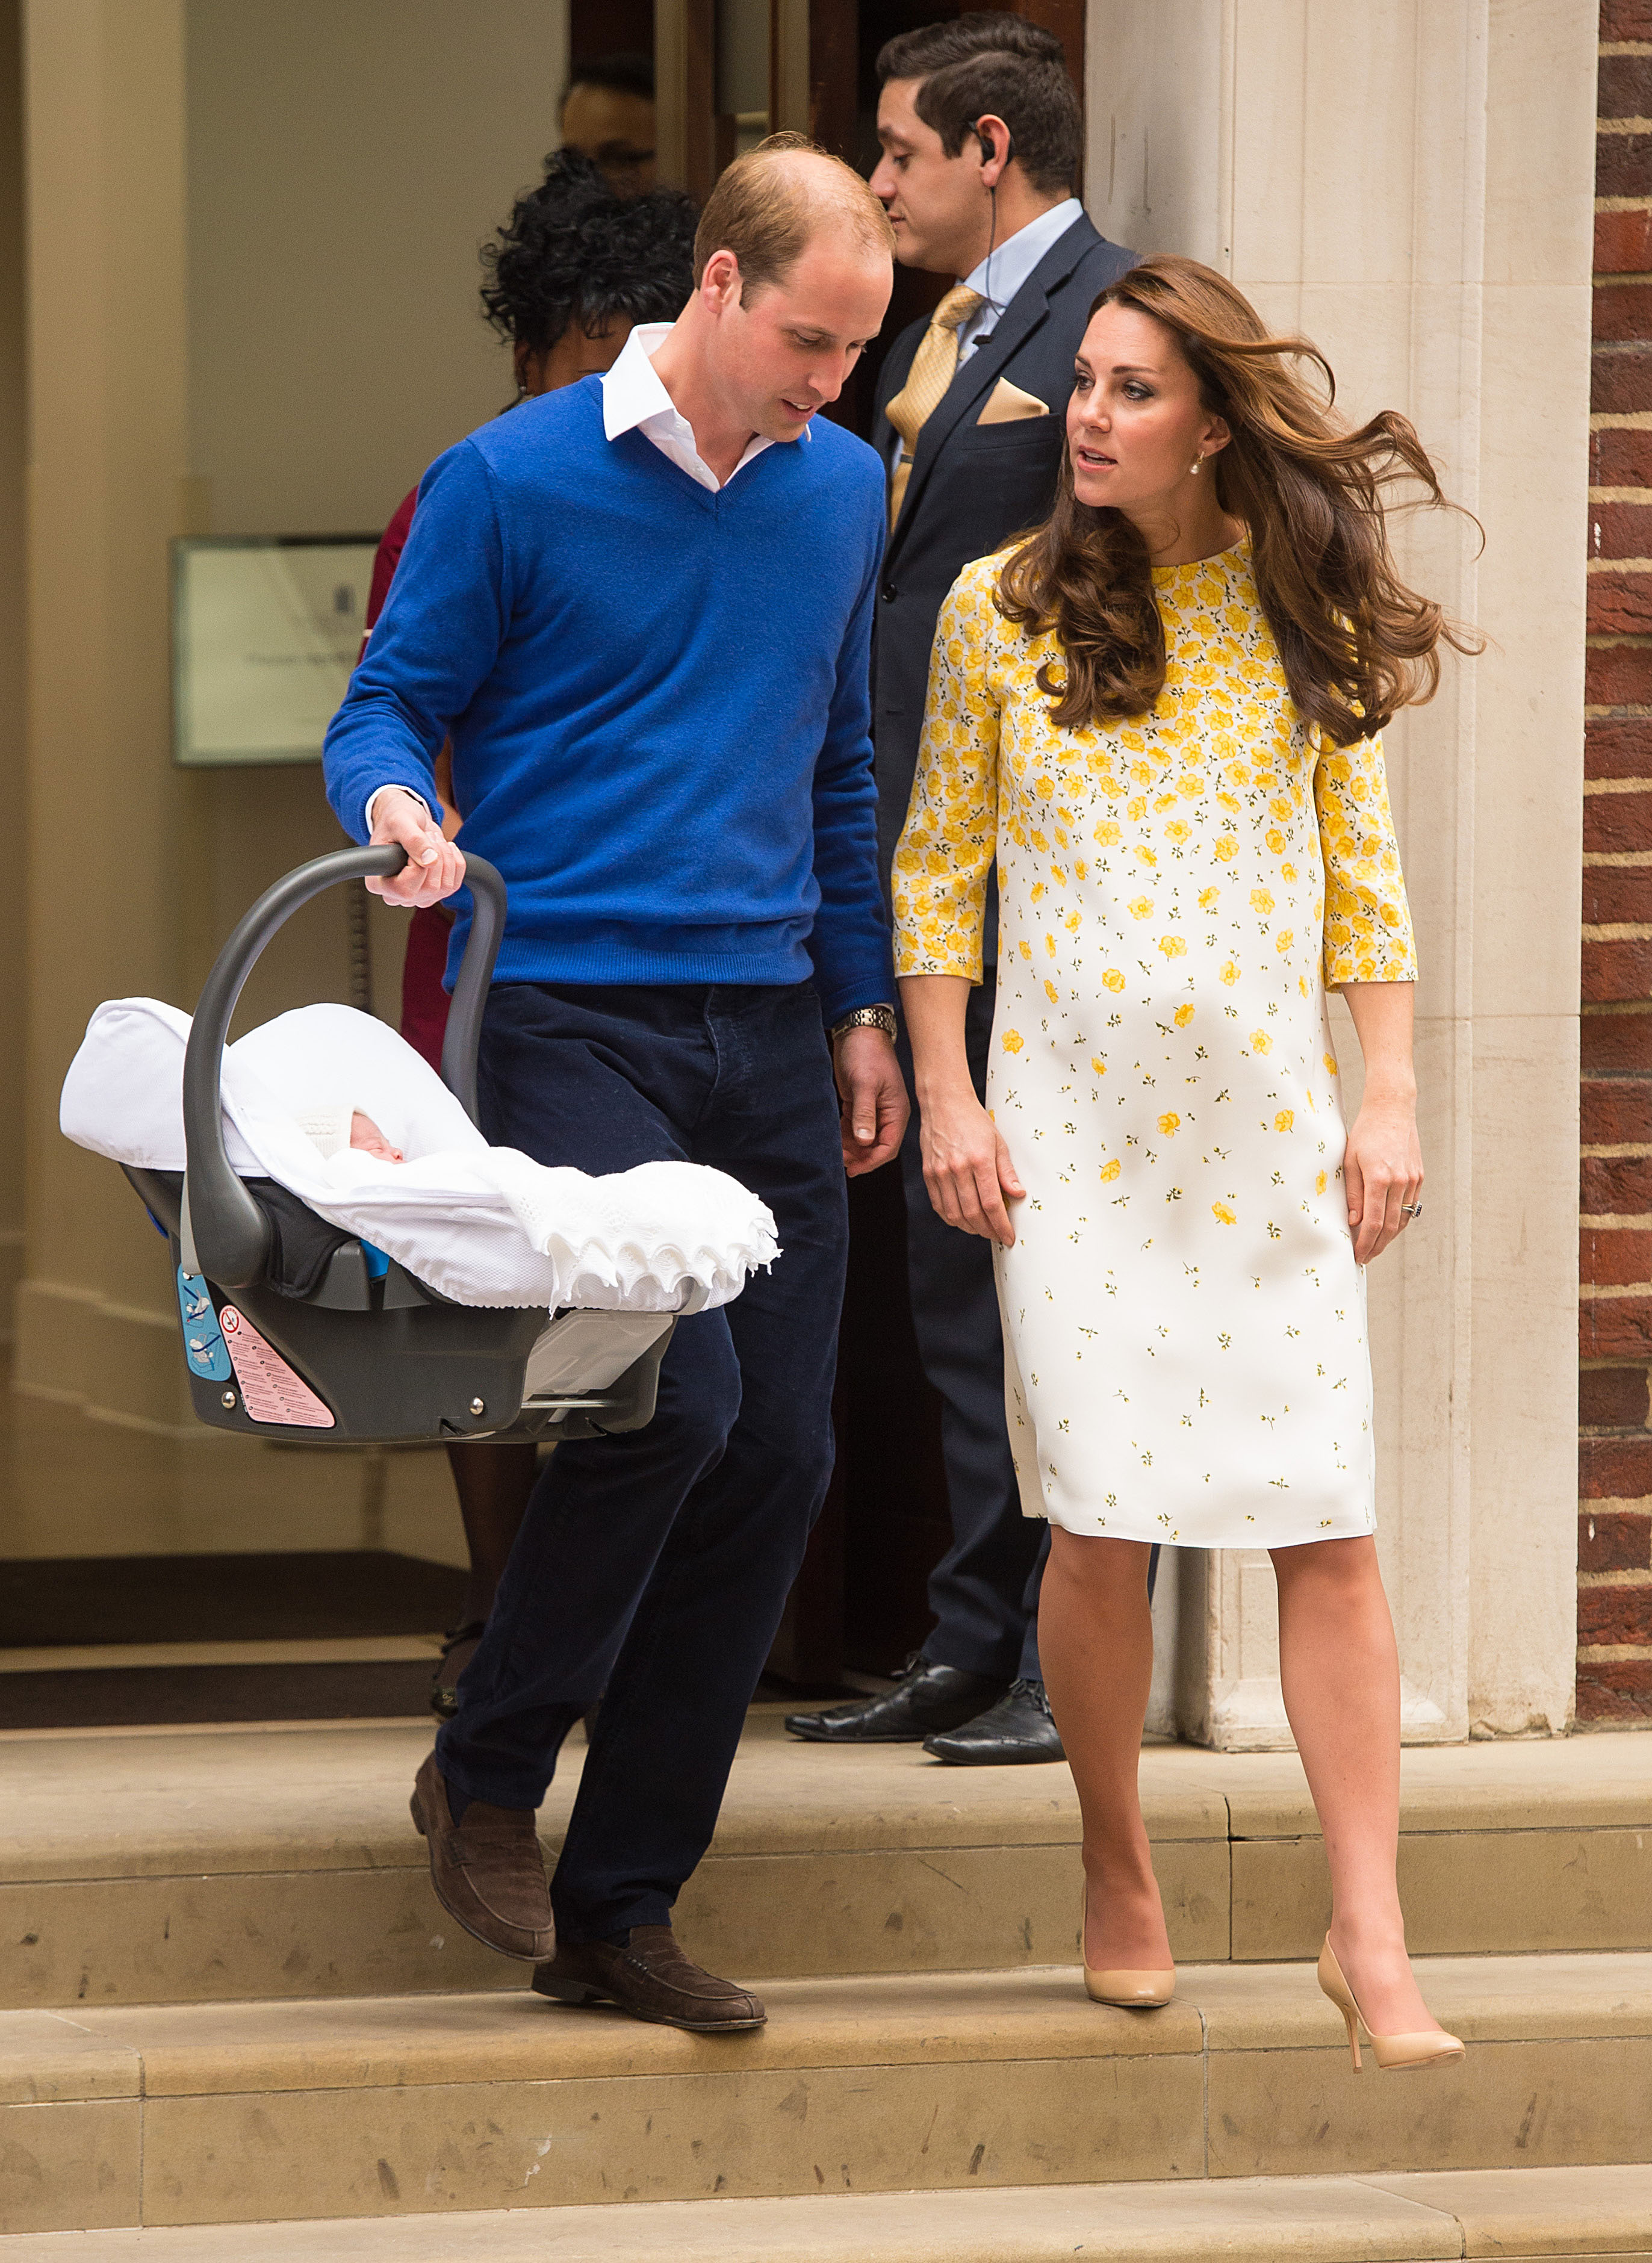 The Duke and Duchess of Cambridge and the newborn Princess of Cambridge as they leave the Lindo Wing of St Mary's Hospital in London